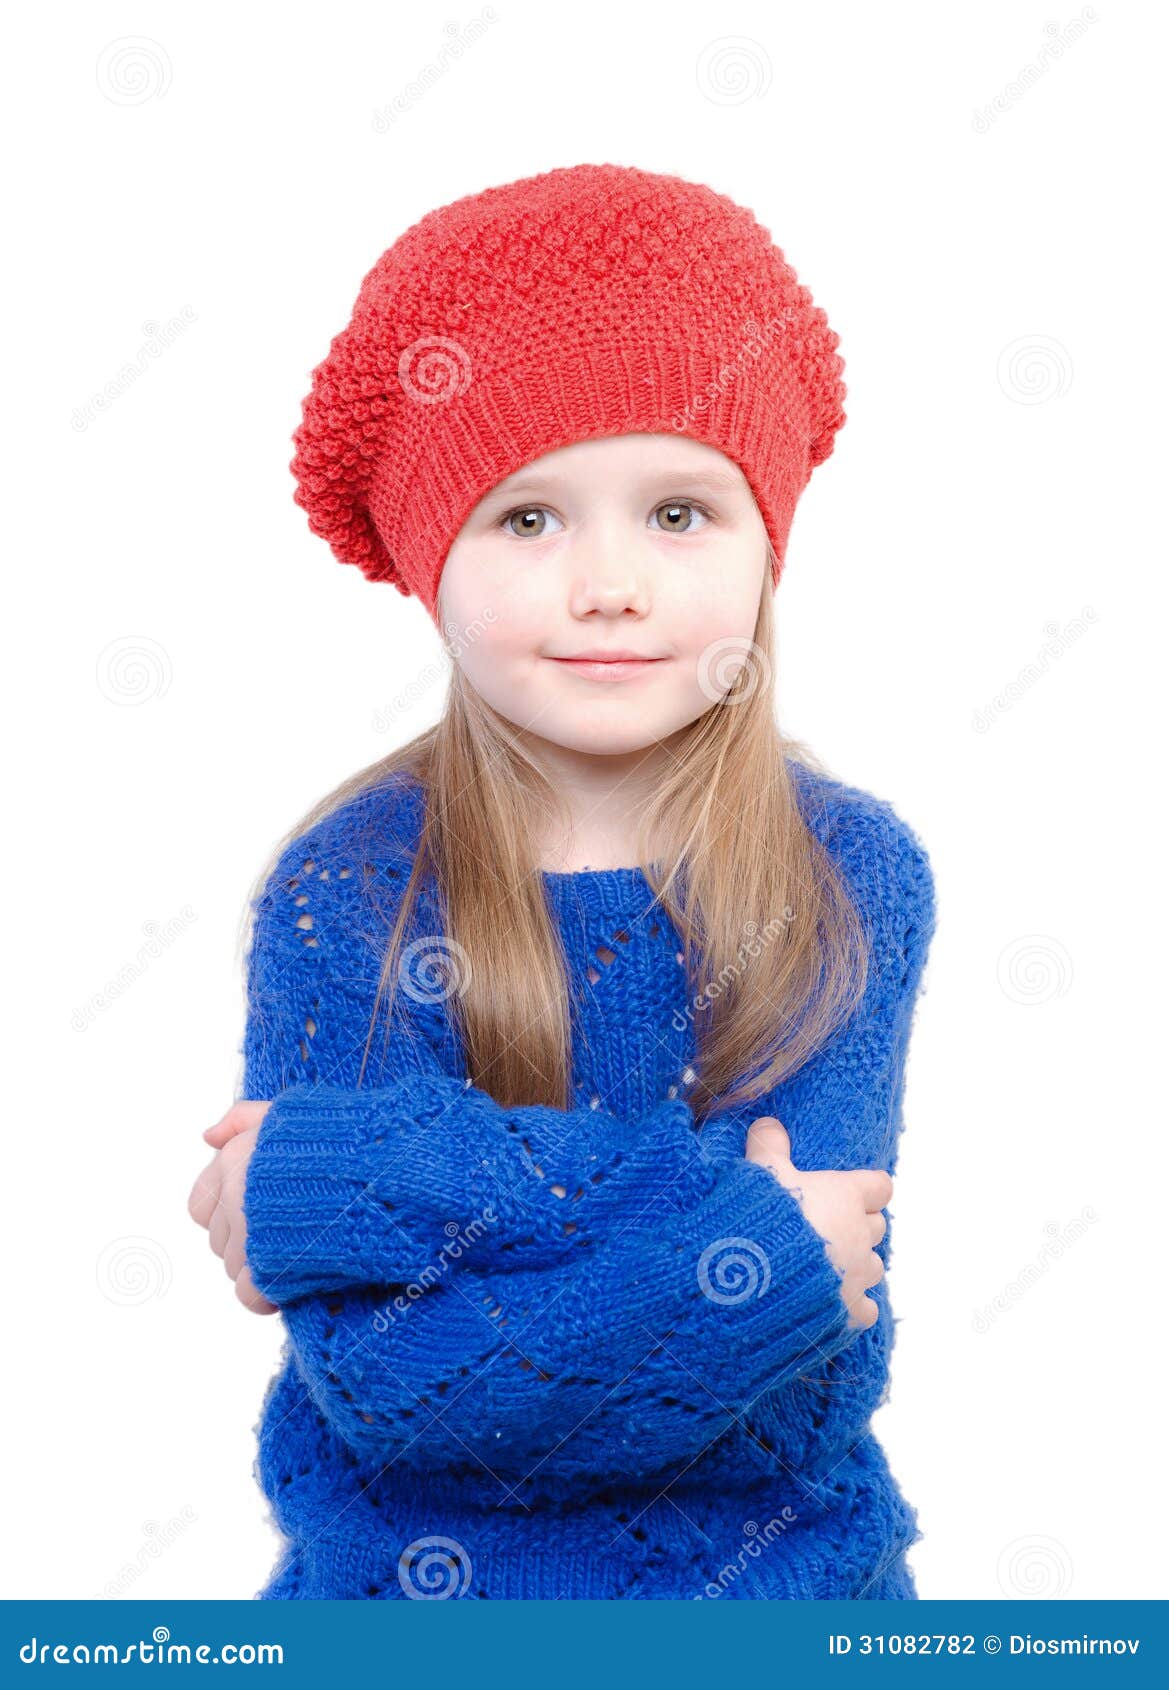 Little Girl In A Red Cap Smiles Stock Photography - Image: 31082782